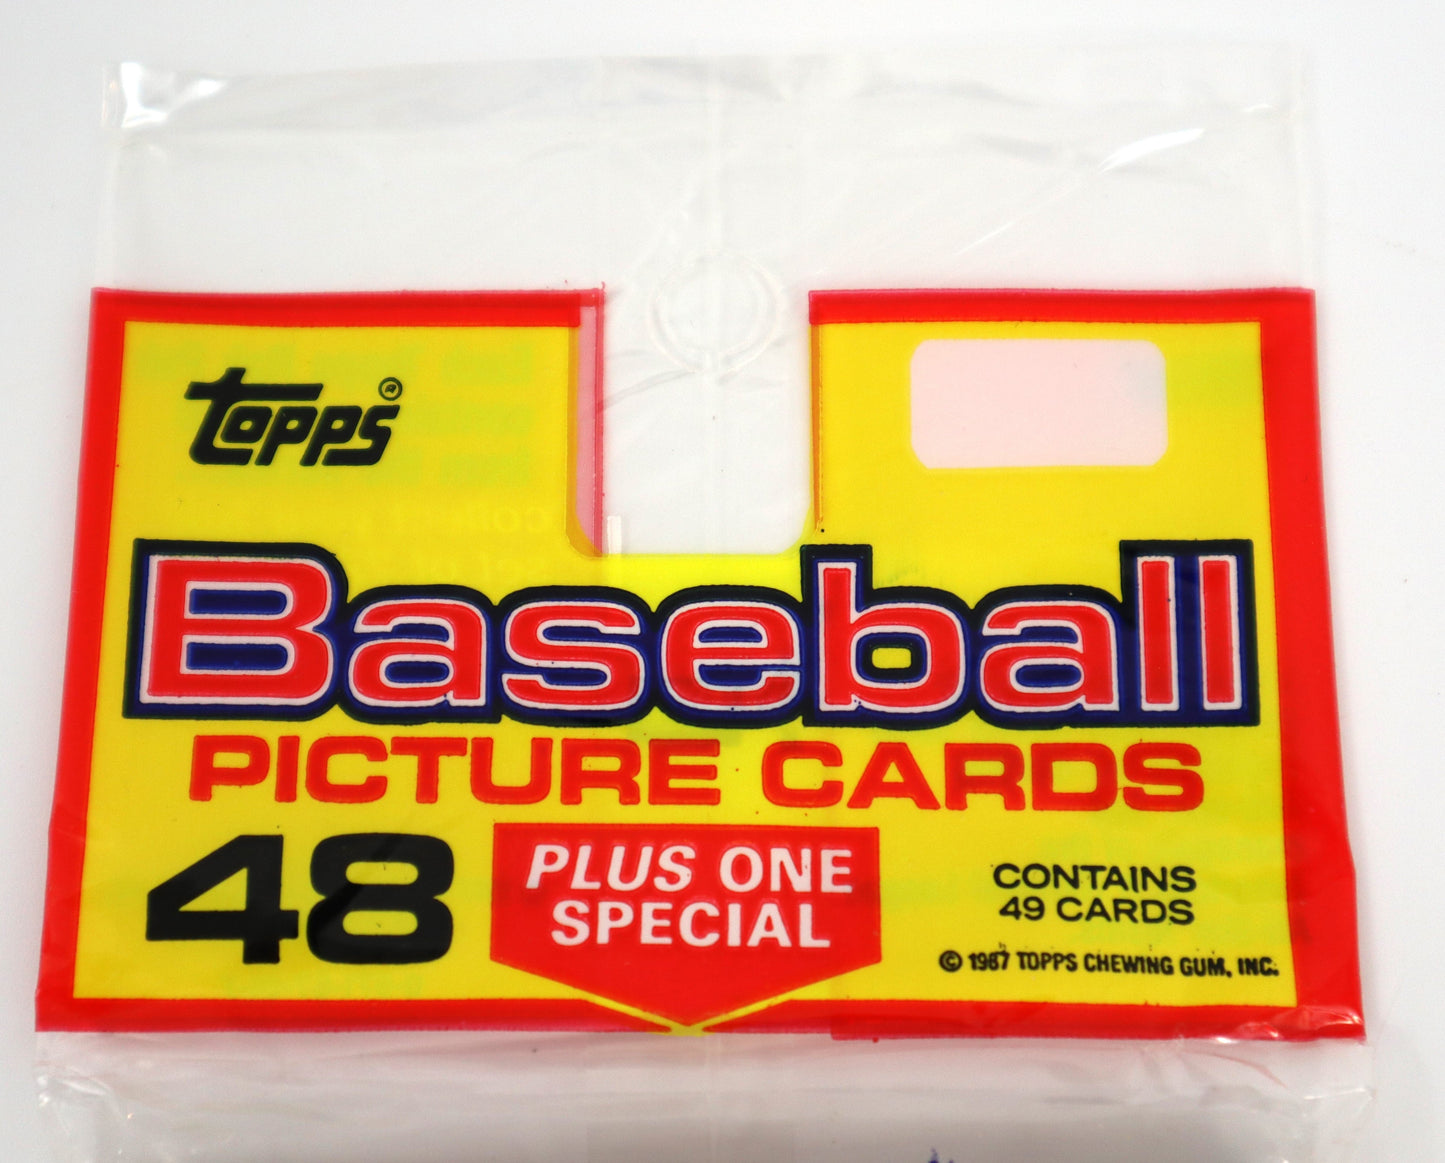 1987 Topps Baseball Cards Rack Pack - Collectibles